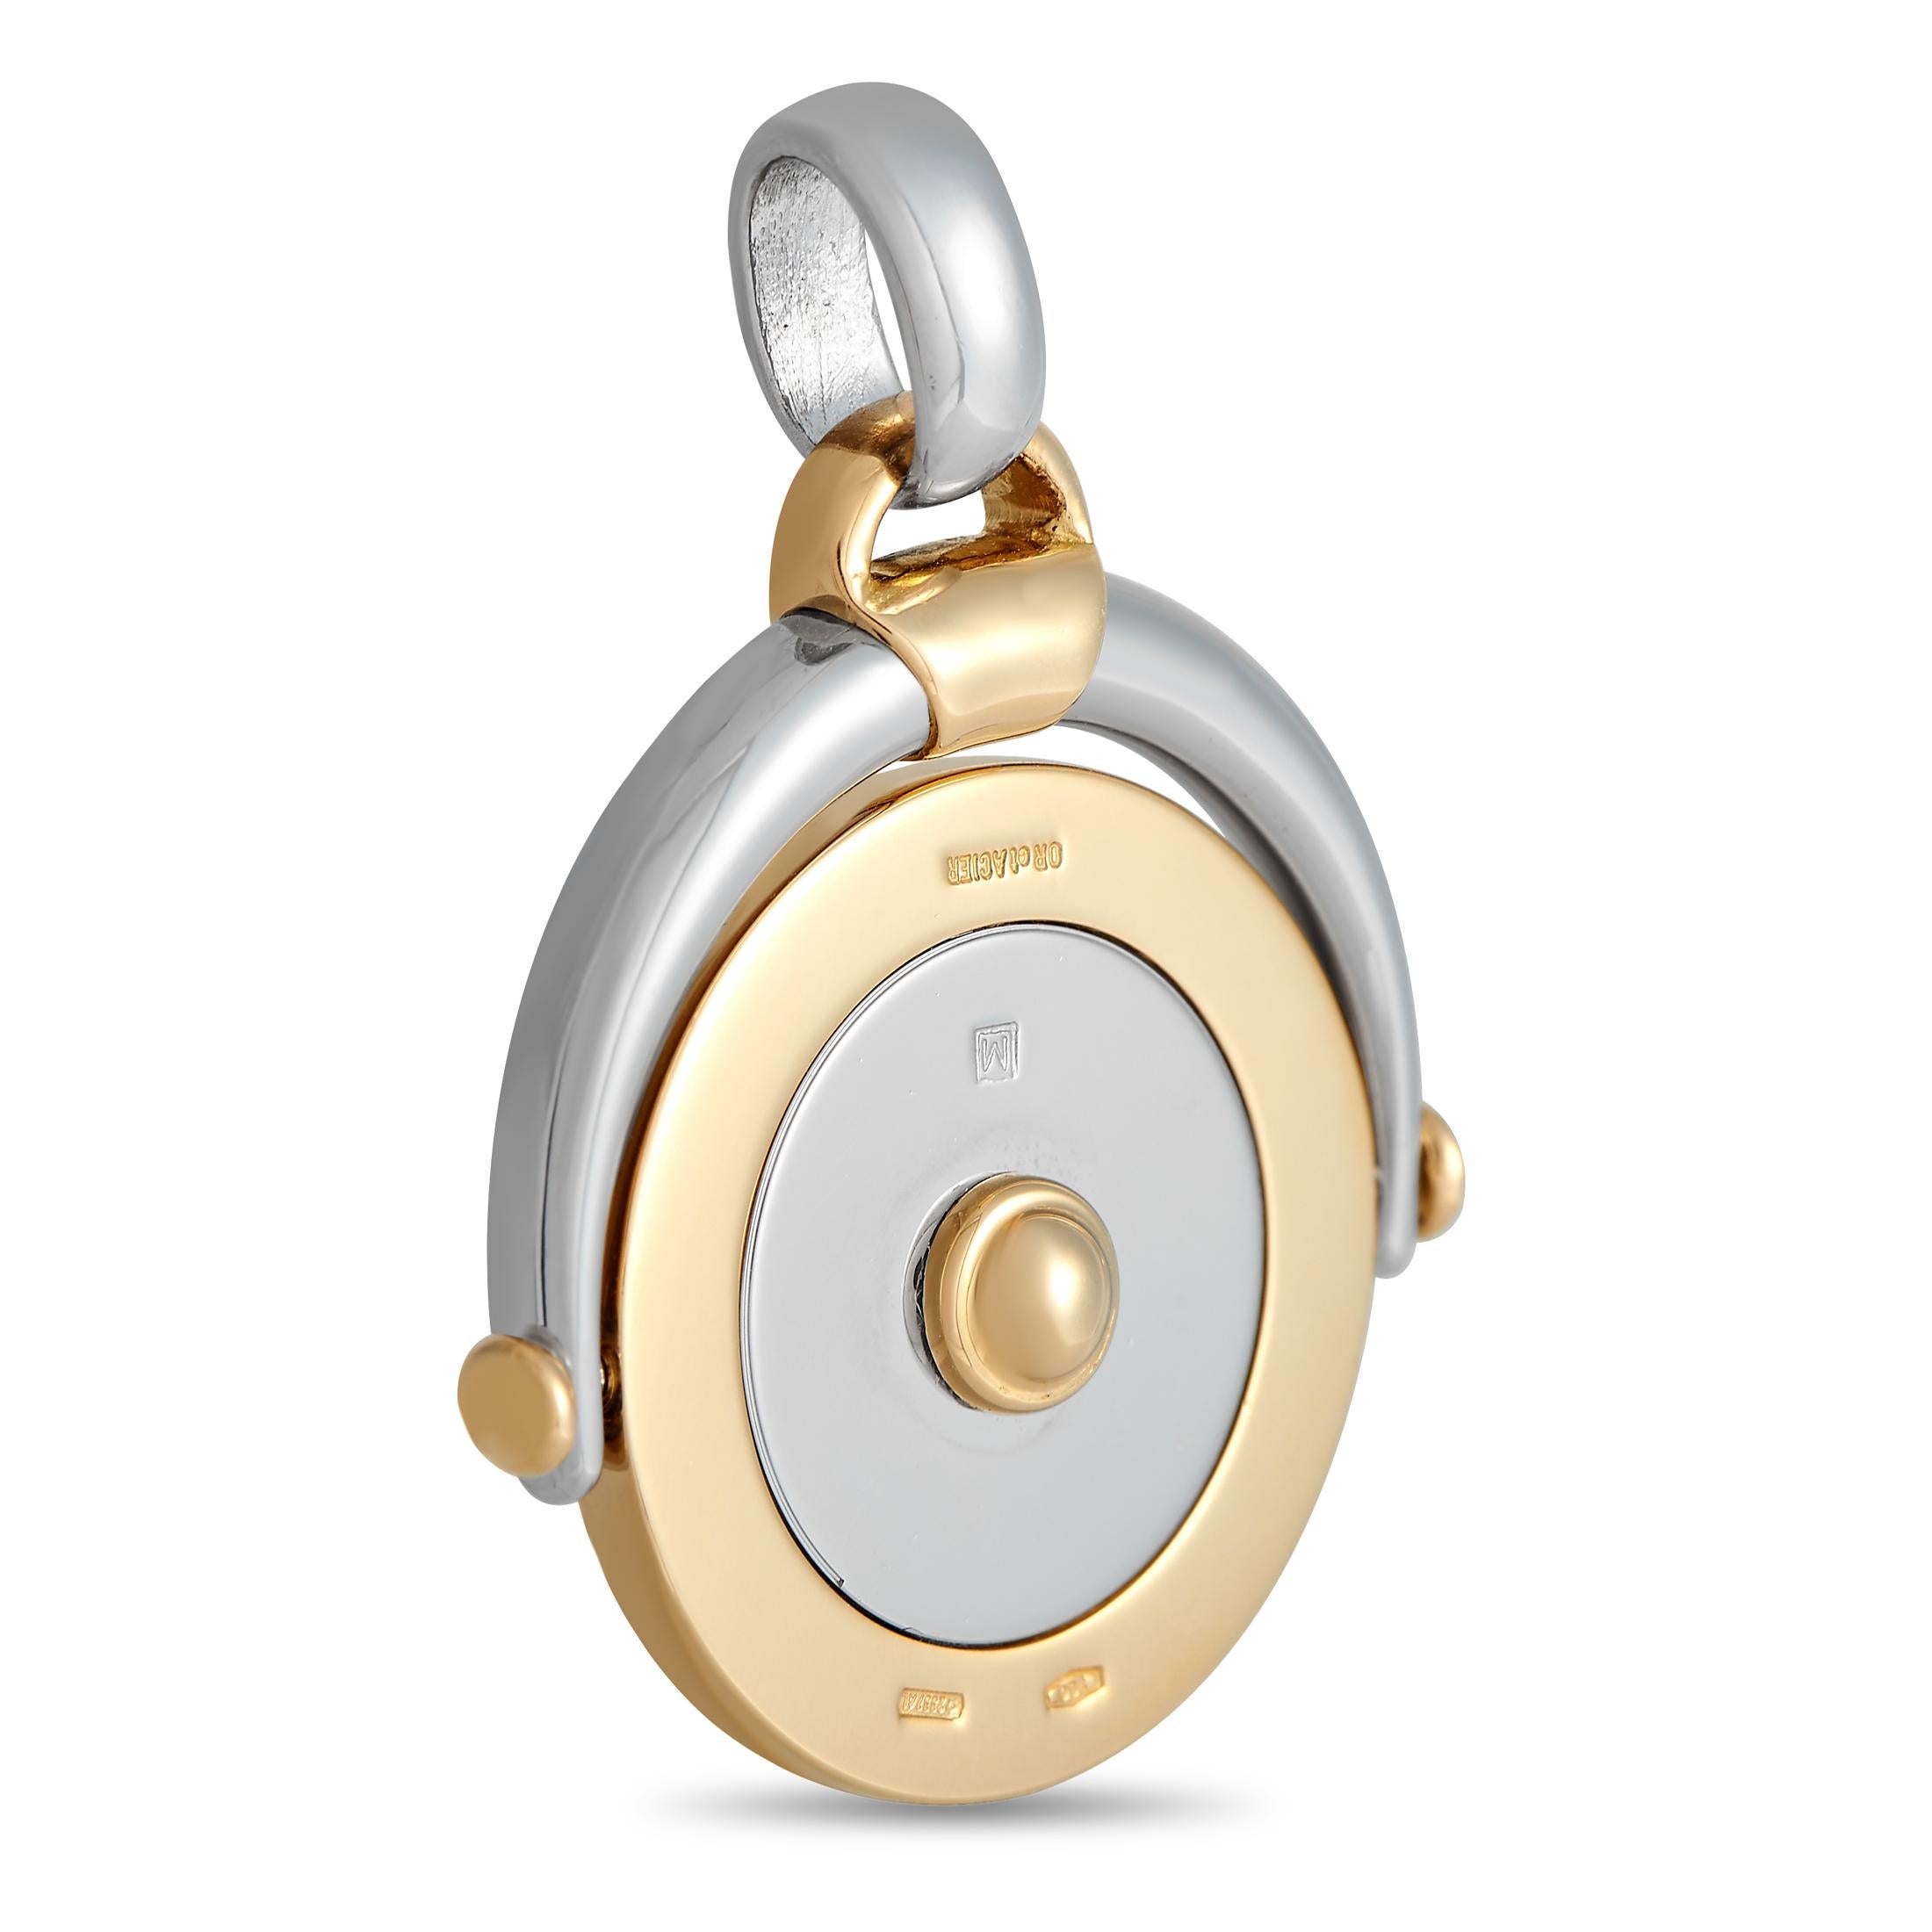 Connect to your astrological identity with this Bvlgari Zodiac Sign Charm. Meant for the Piscean, this trinket features a stainless steel and 18K yellow gold disc with the Pisces symbol represented by two fish swimming in opposite directions. The